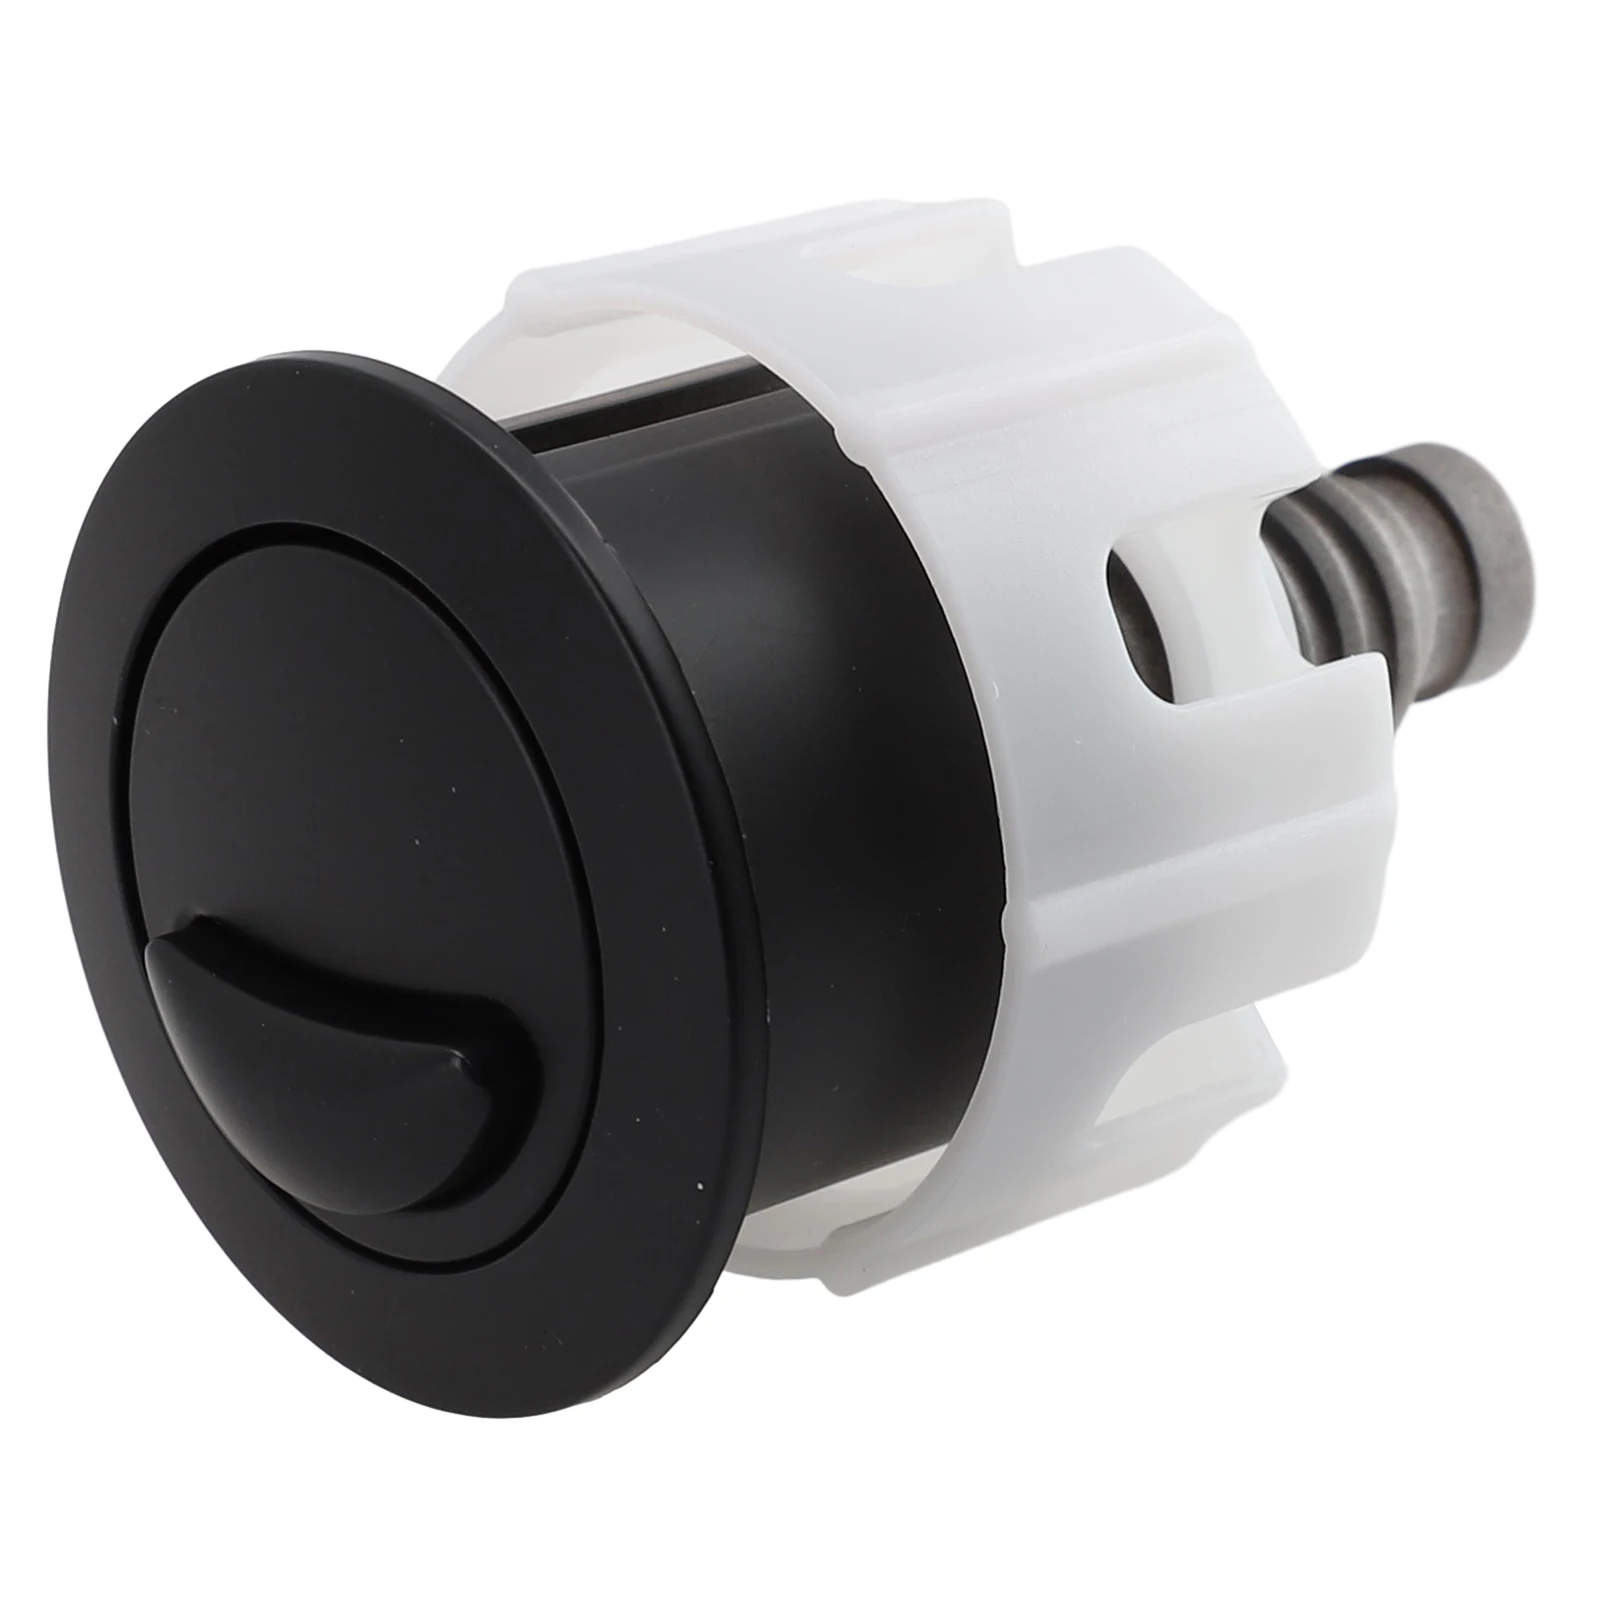 38 48 58mm dual push button flush toiletefjeofo ocrescent shape 2 rods universal toilet button cover switch Switch Push Button Tank Water Saving 38-49mm ABS Accessories Black Bthroom Toilet Dual Flush Home Improvement Replacement